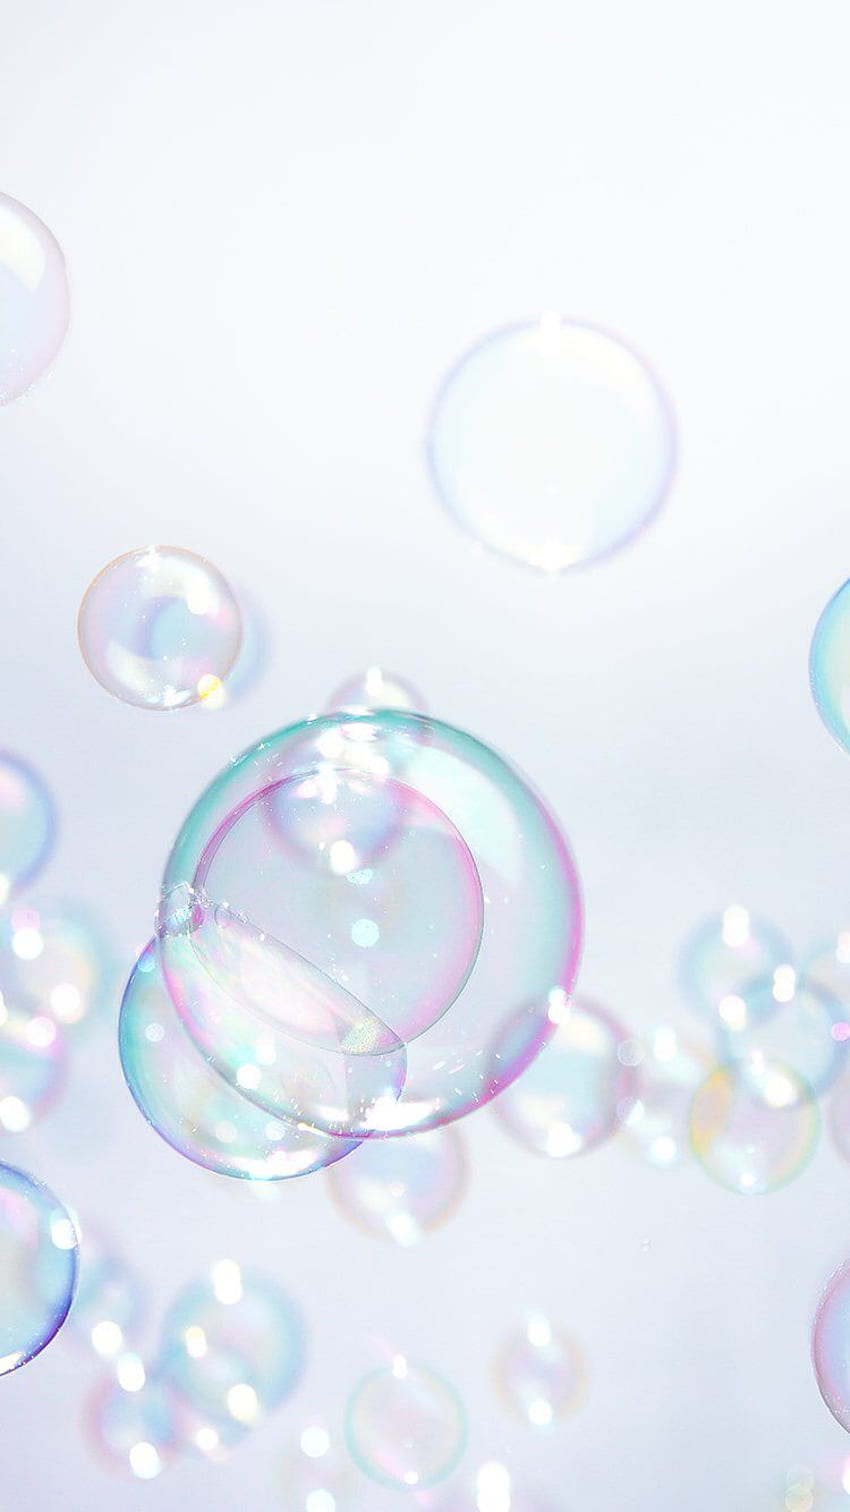 Cool Bubble Backgrounds 54 images